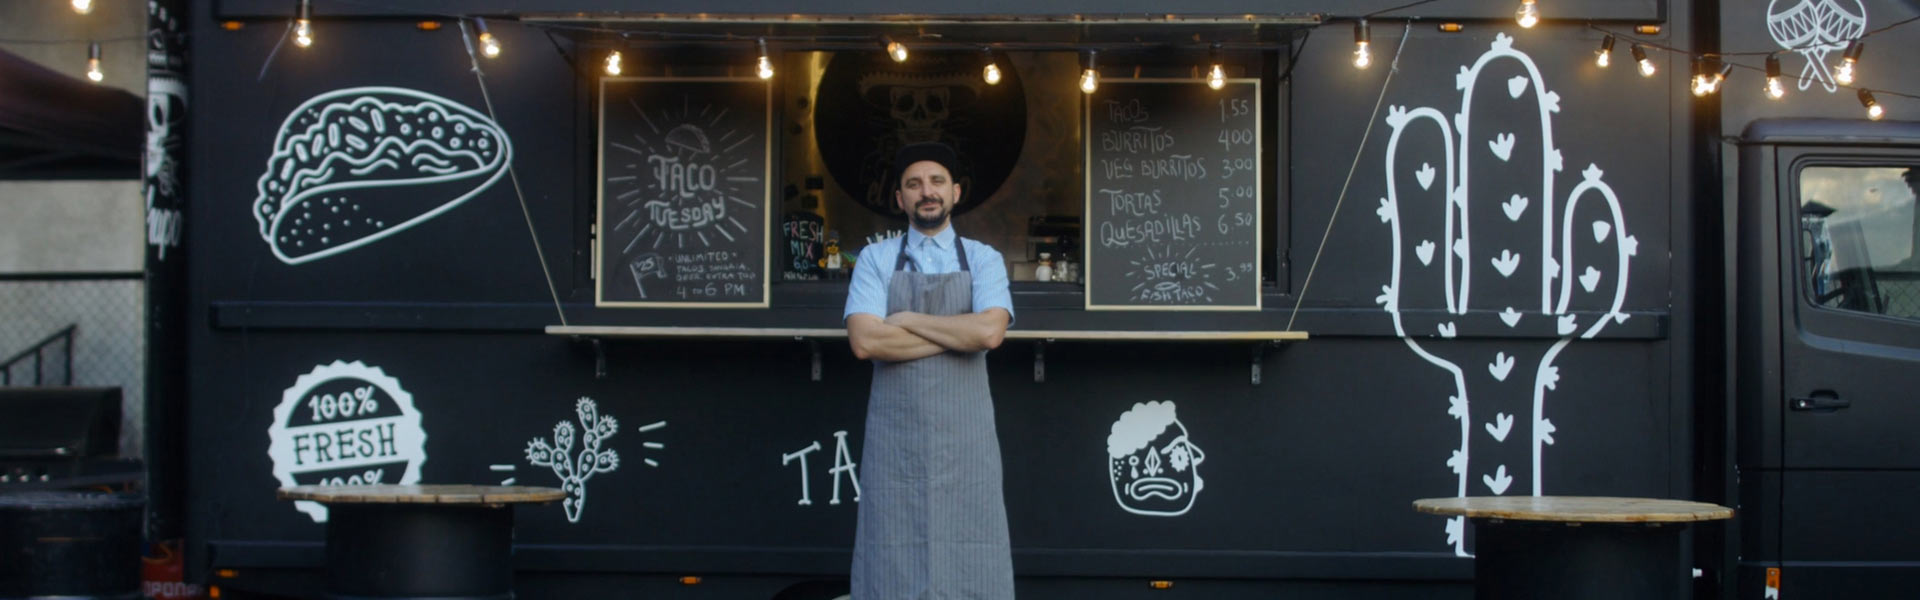 Food Business Master’s Degree - food truck